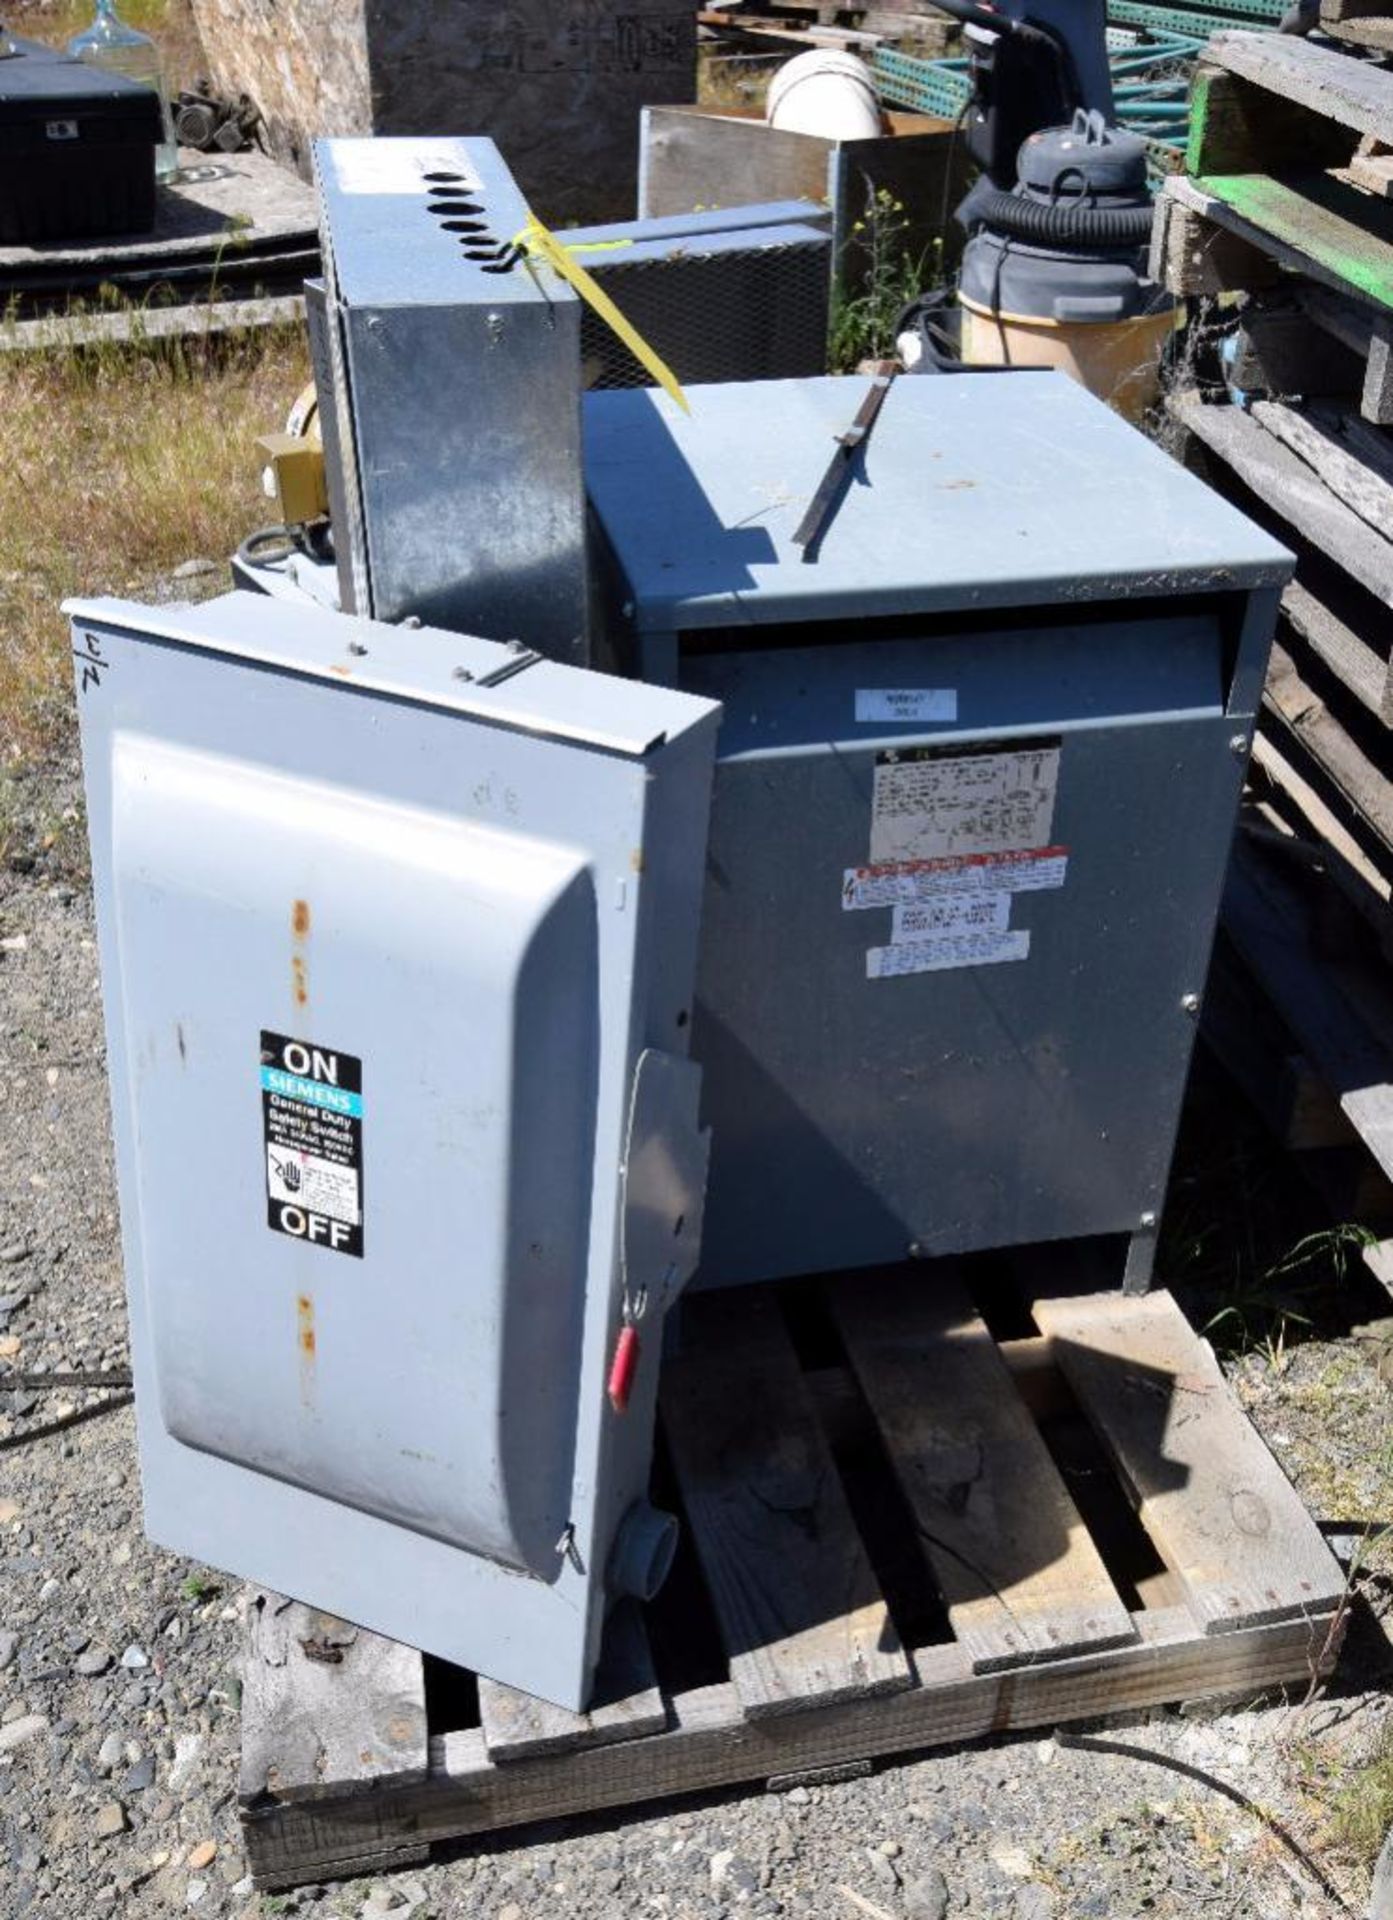 LOT: (1) Square D 45 KVA transformer, Catalog# 45T3H, style 33749-17212-082, date code 9902, type SO - Image 4 of 8